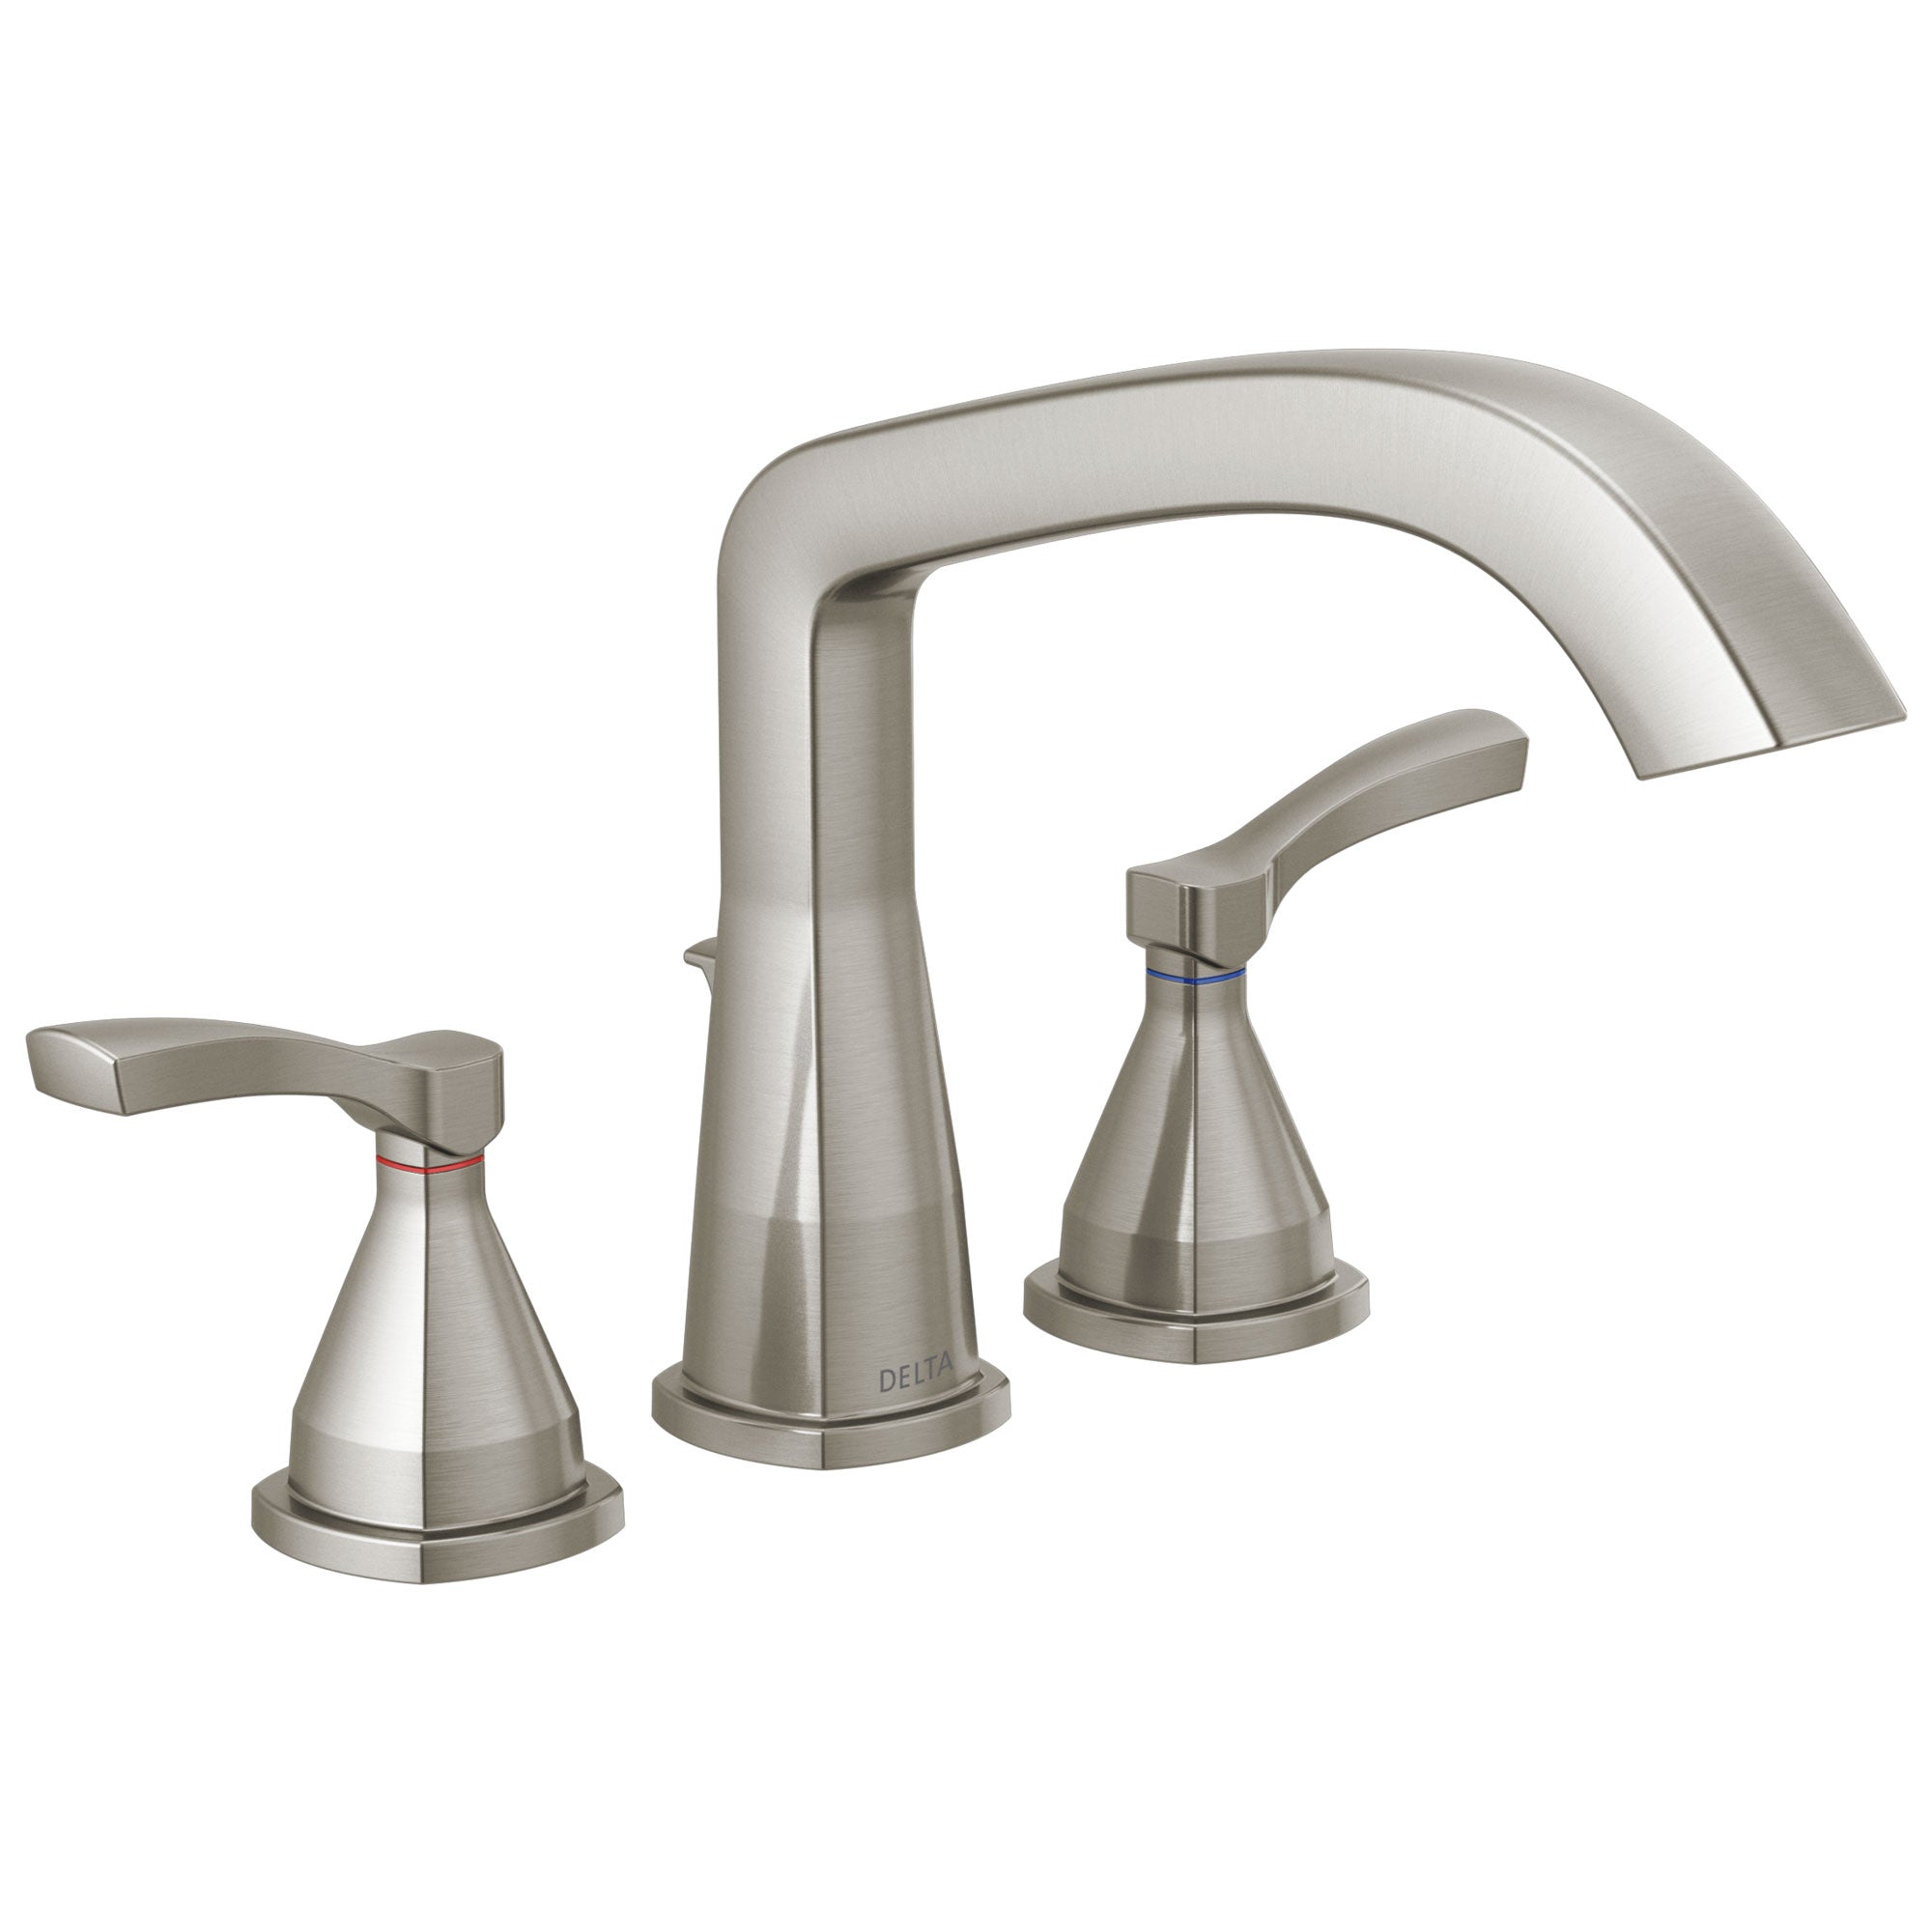 Delta Stryke Stainless Steel Finish Three Hole Roman Tub Filler Faucet Trim Kit (Requires Valve) DT2776SS